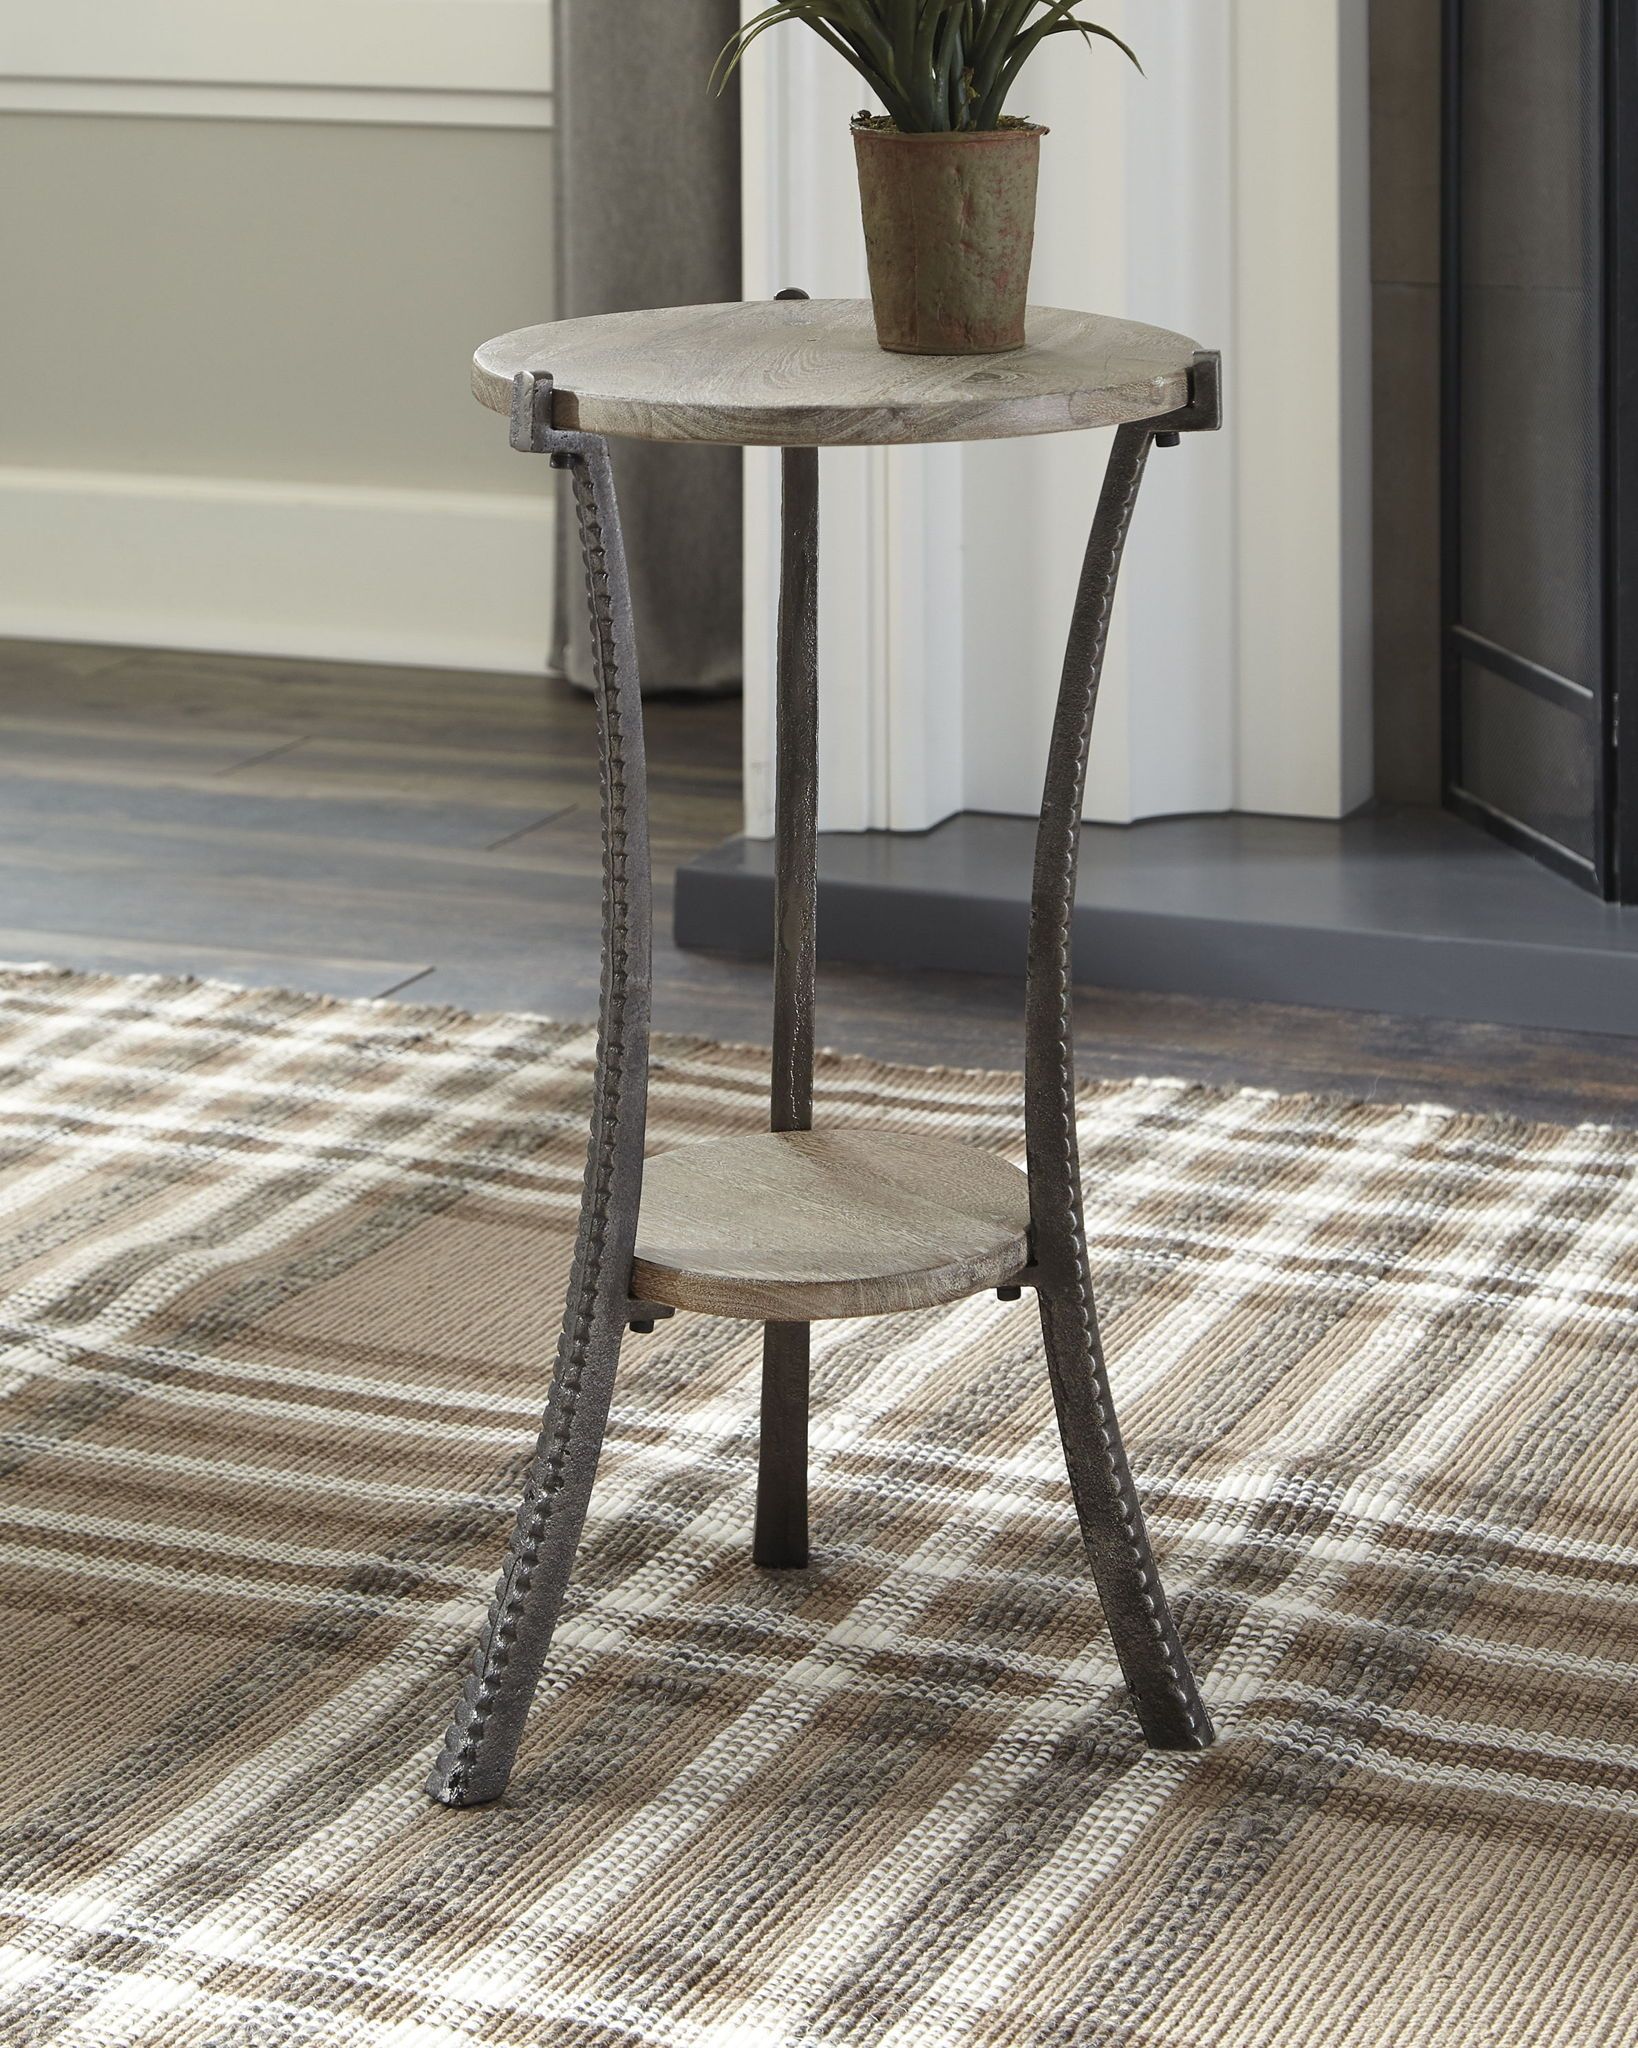 Enderton – White Wash/pewter – Accent Table | Furniture Warehouse Ohio Regarding White Washed Wood Accent Stools (View 17 of 20)